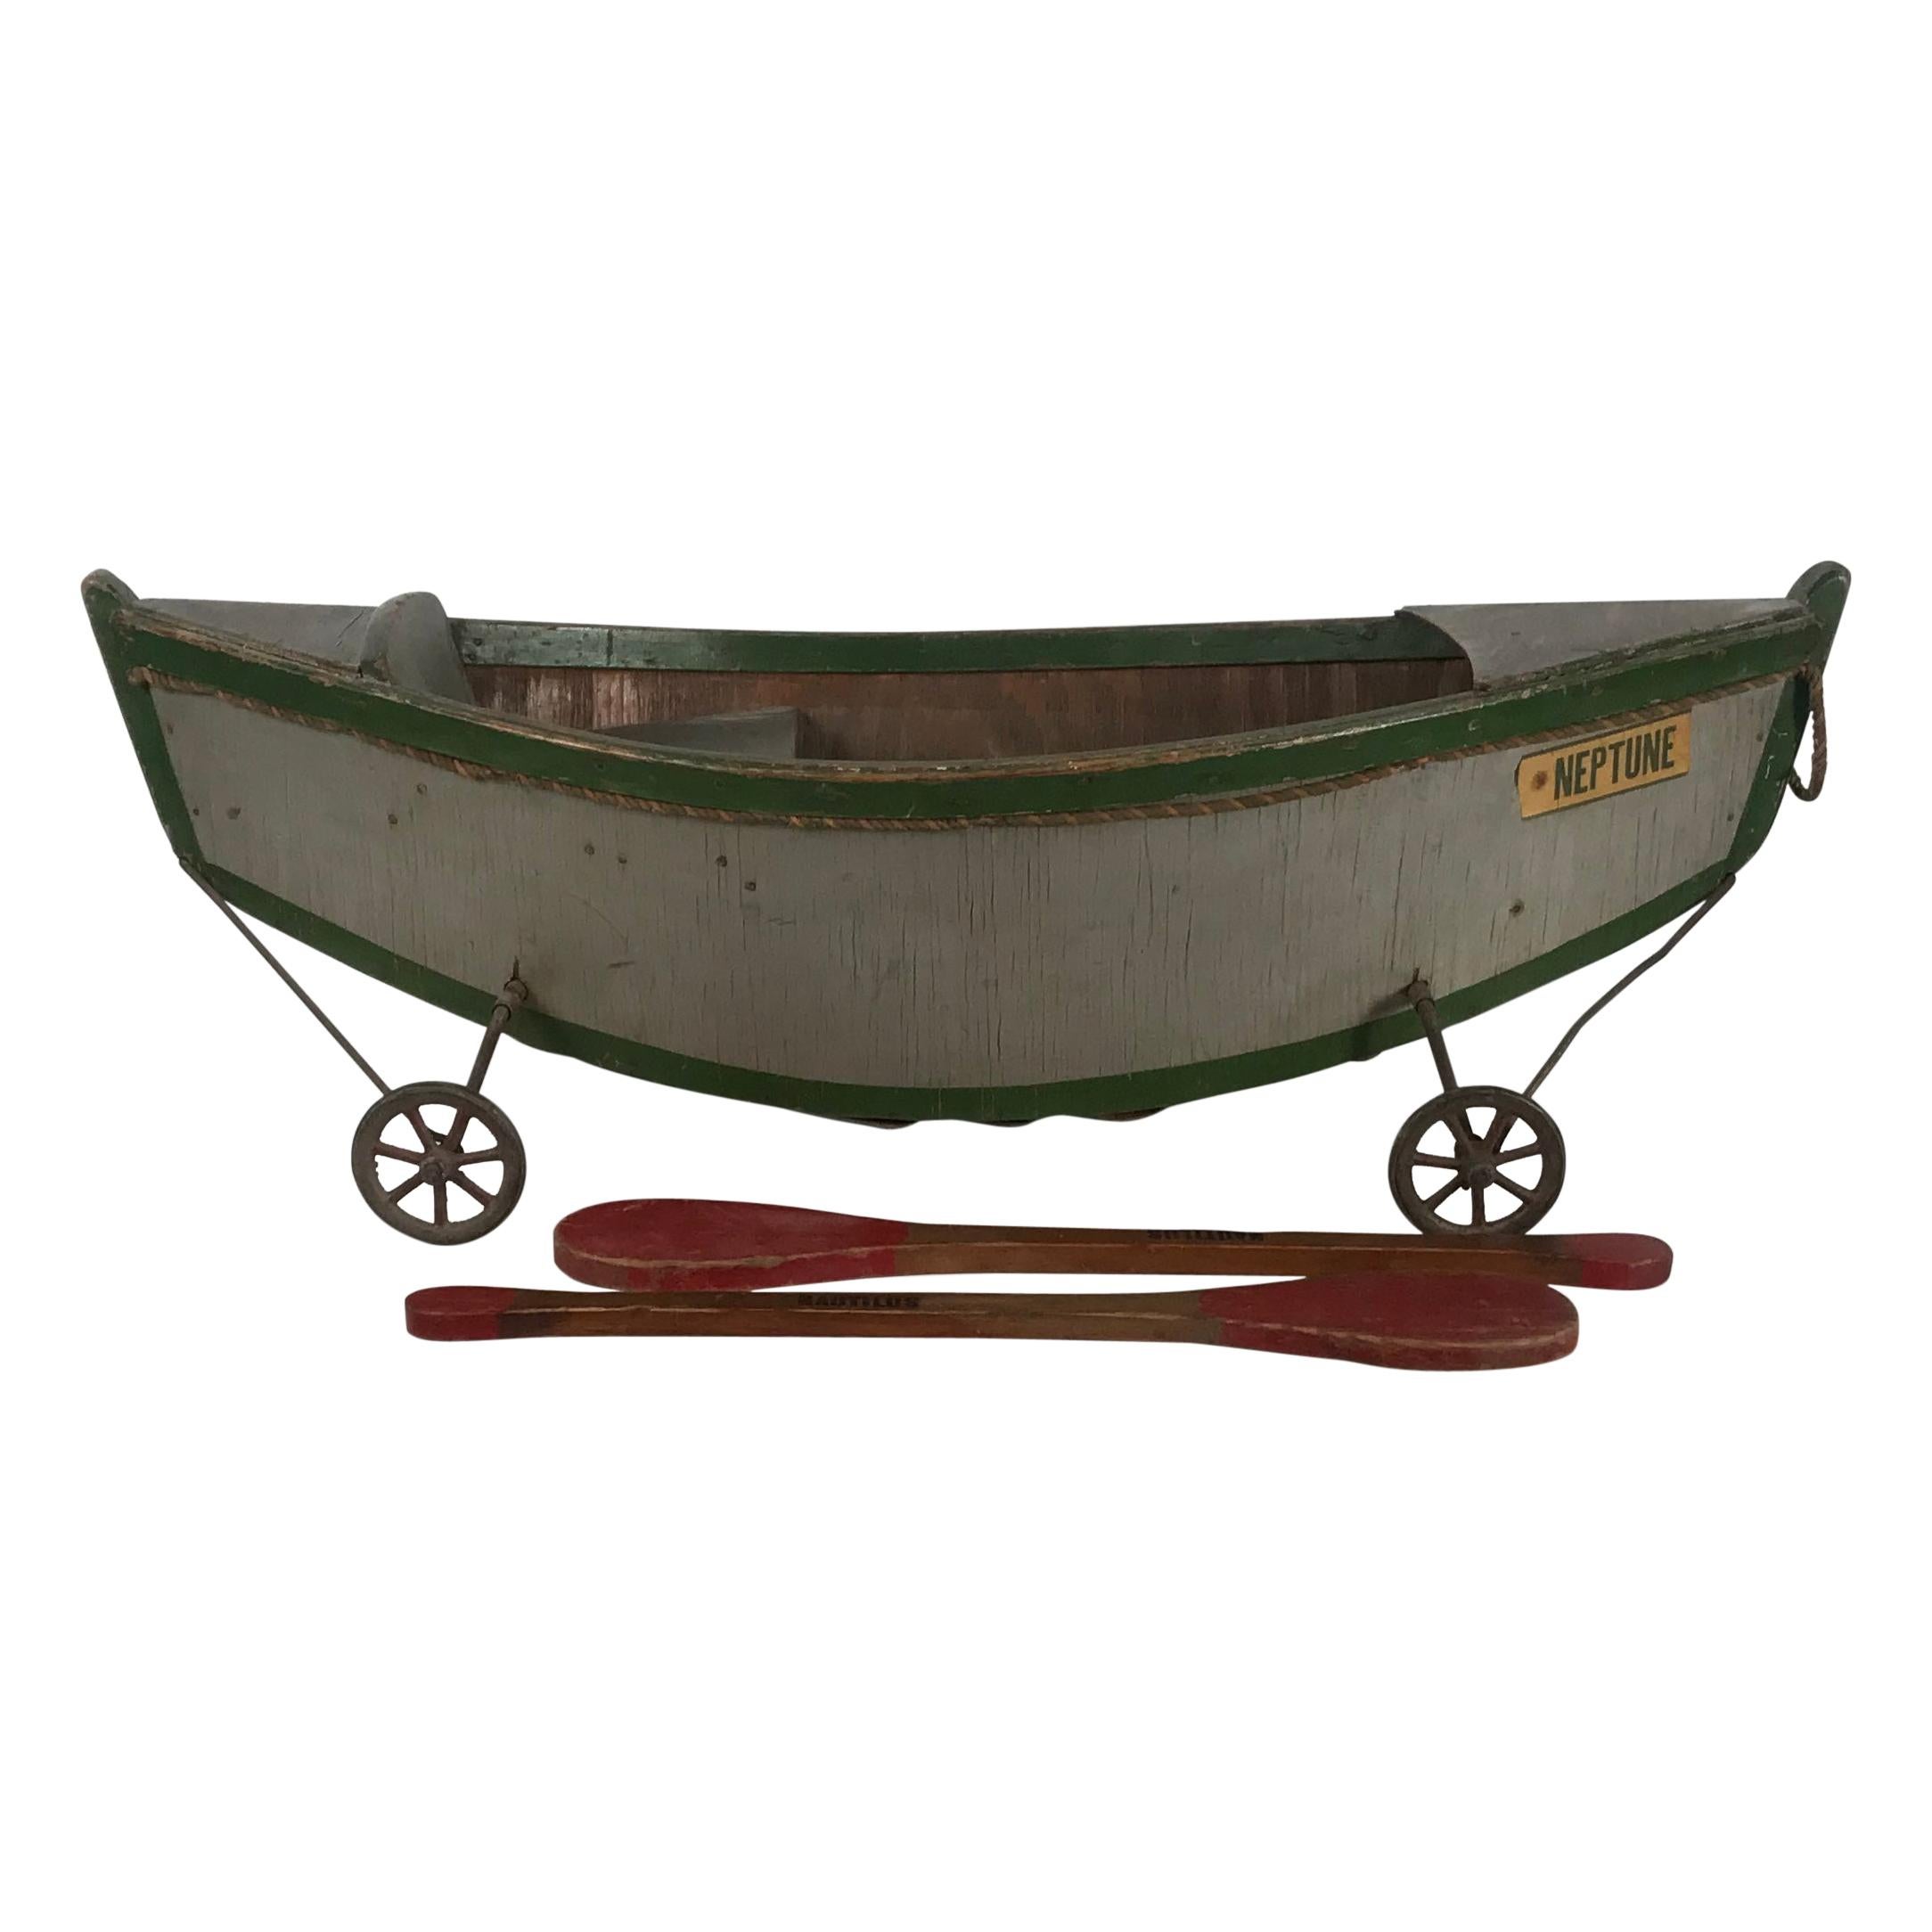 Rare Antique Wooden Child's Ride on Wooden Toy Boat by Nautilus Toy Co. London  For Sale